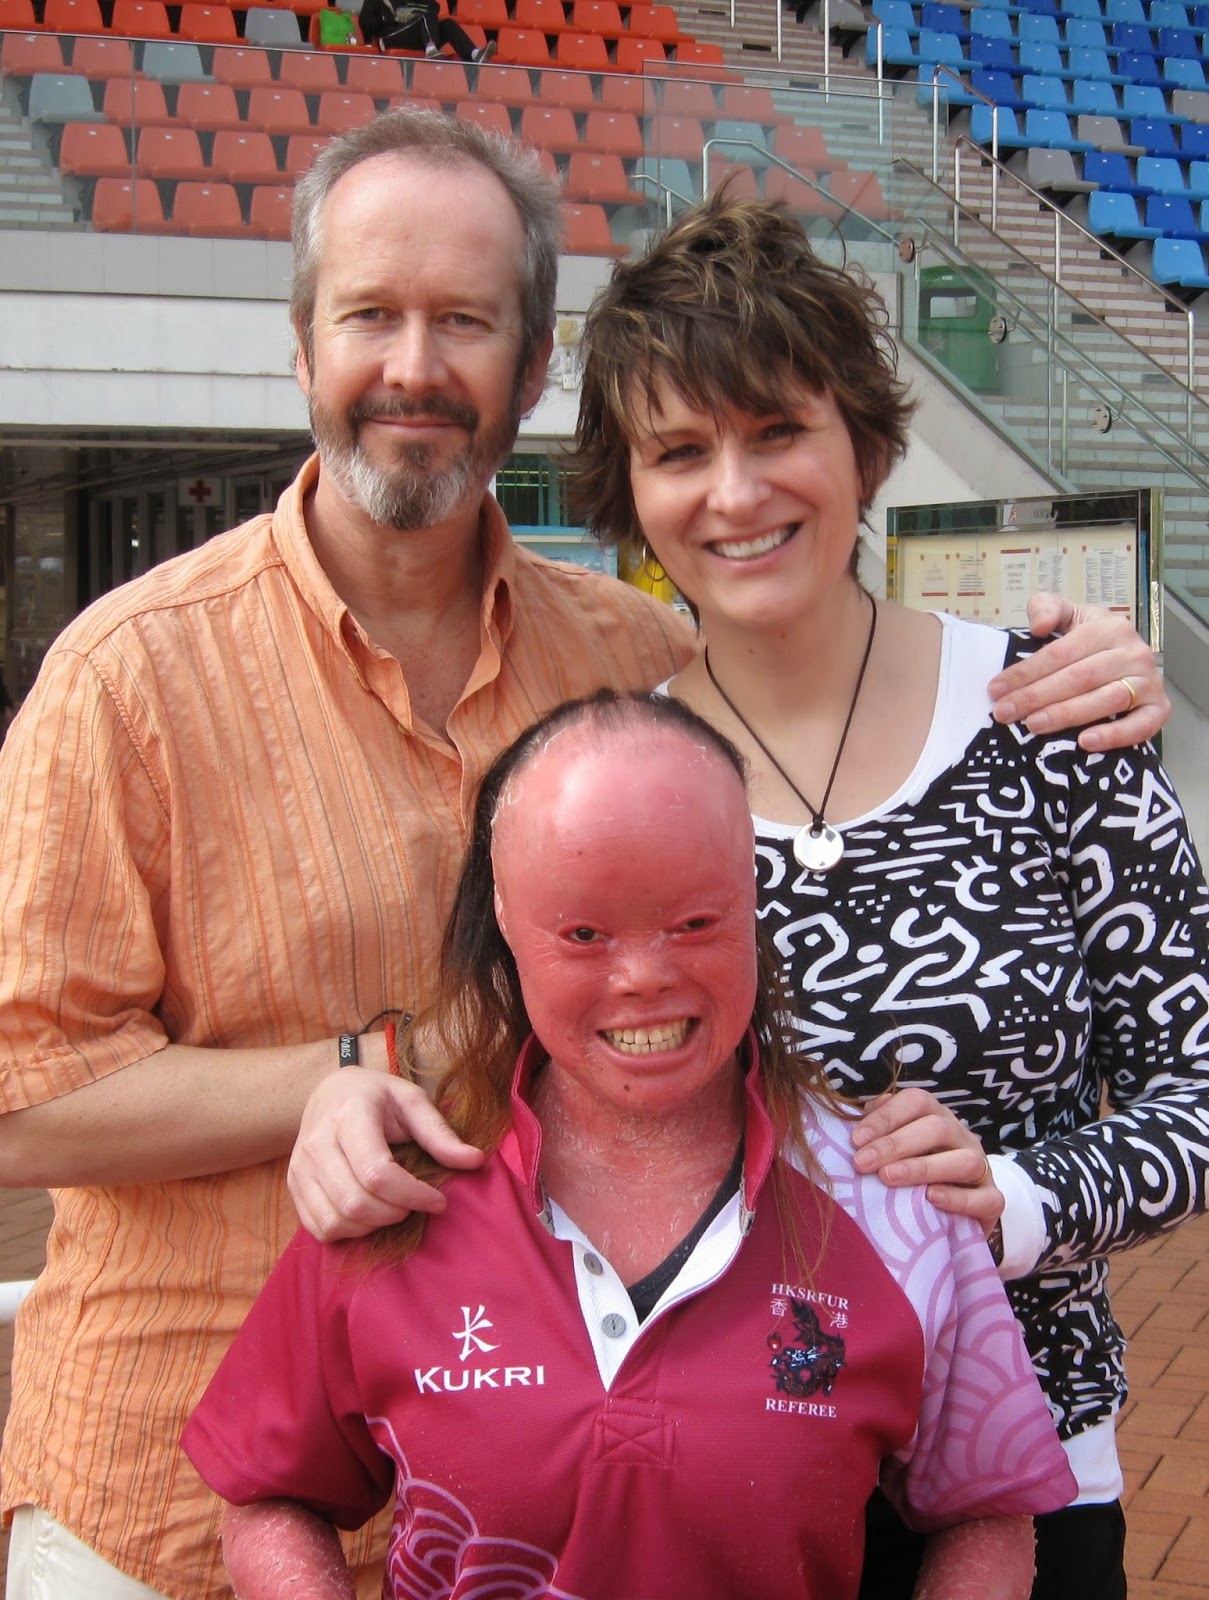 Mui, who has harlequin ichthyosis, with her parents